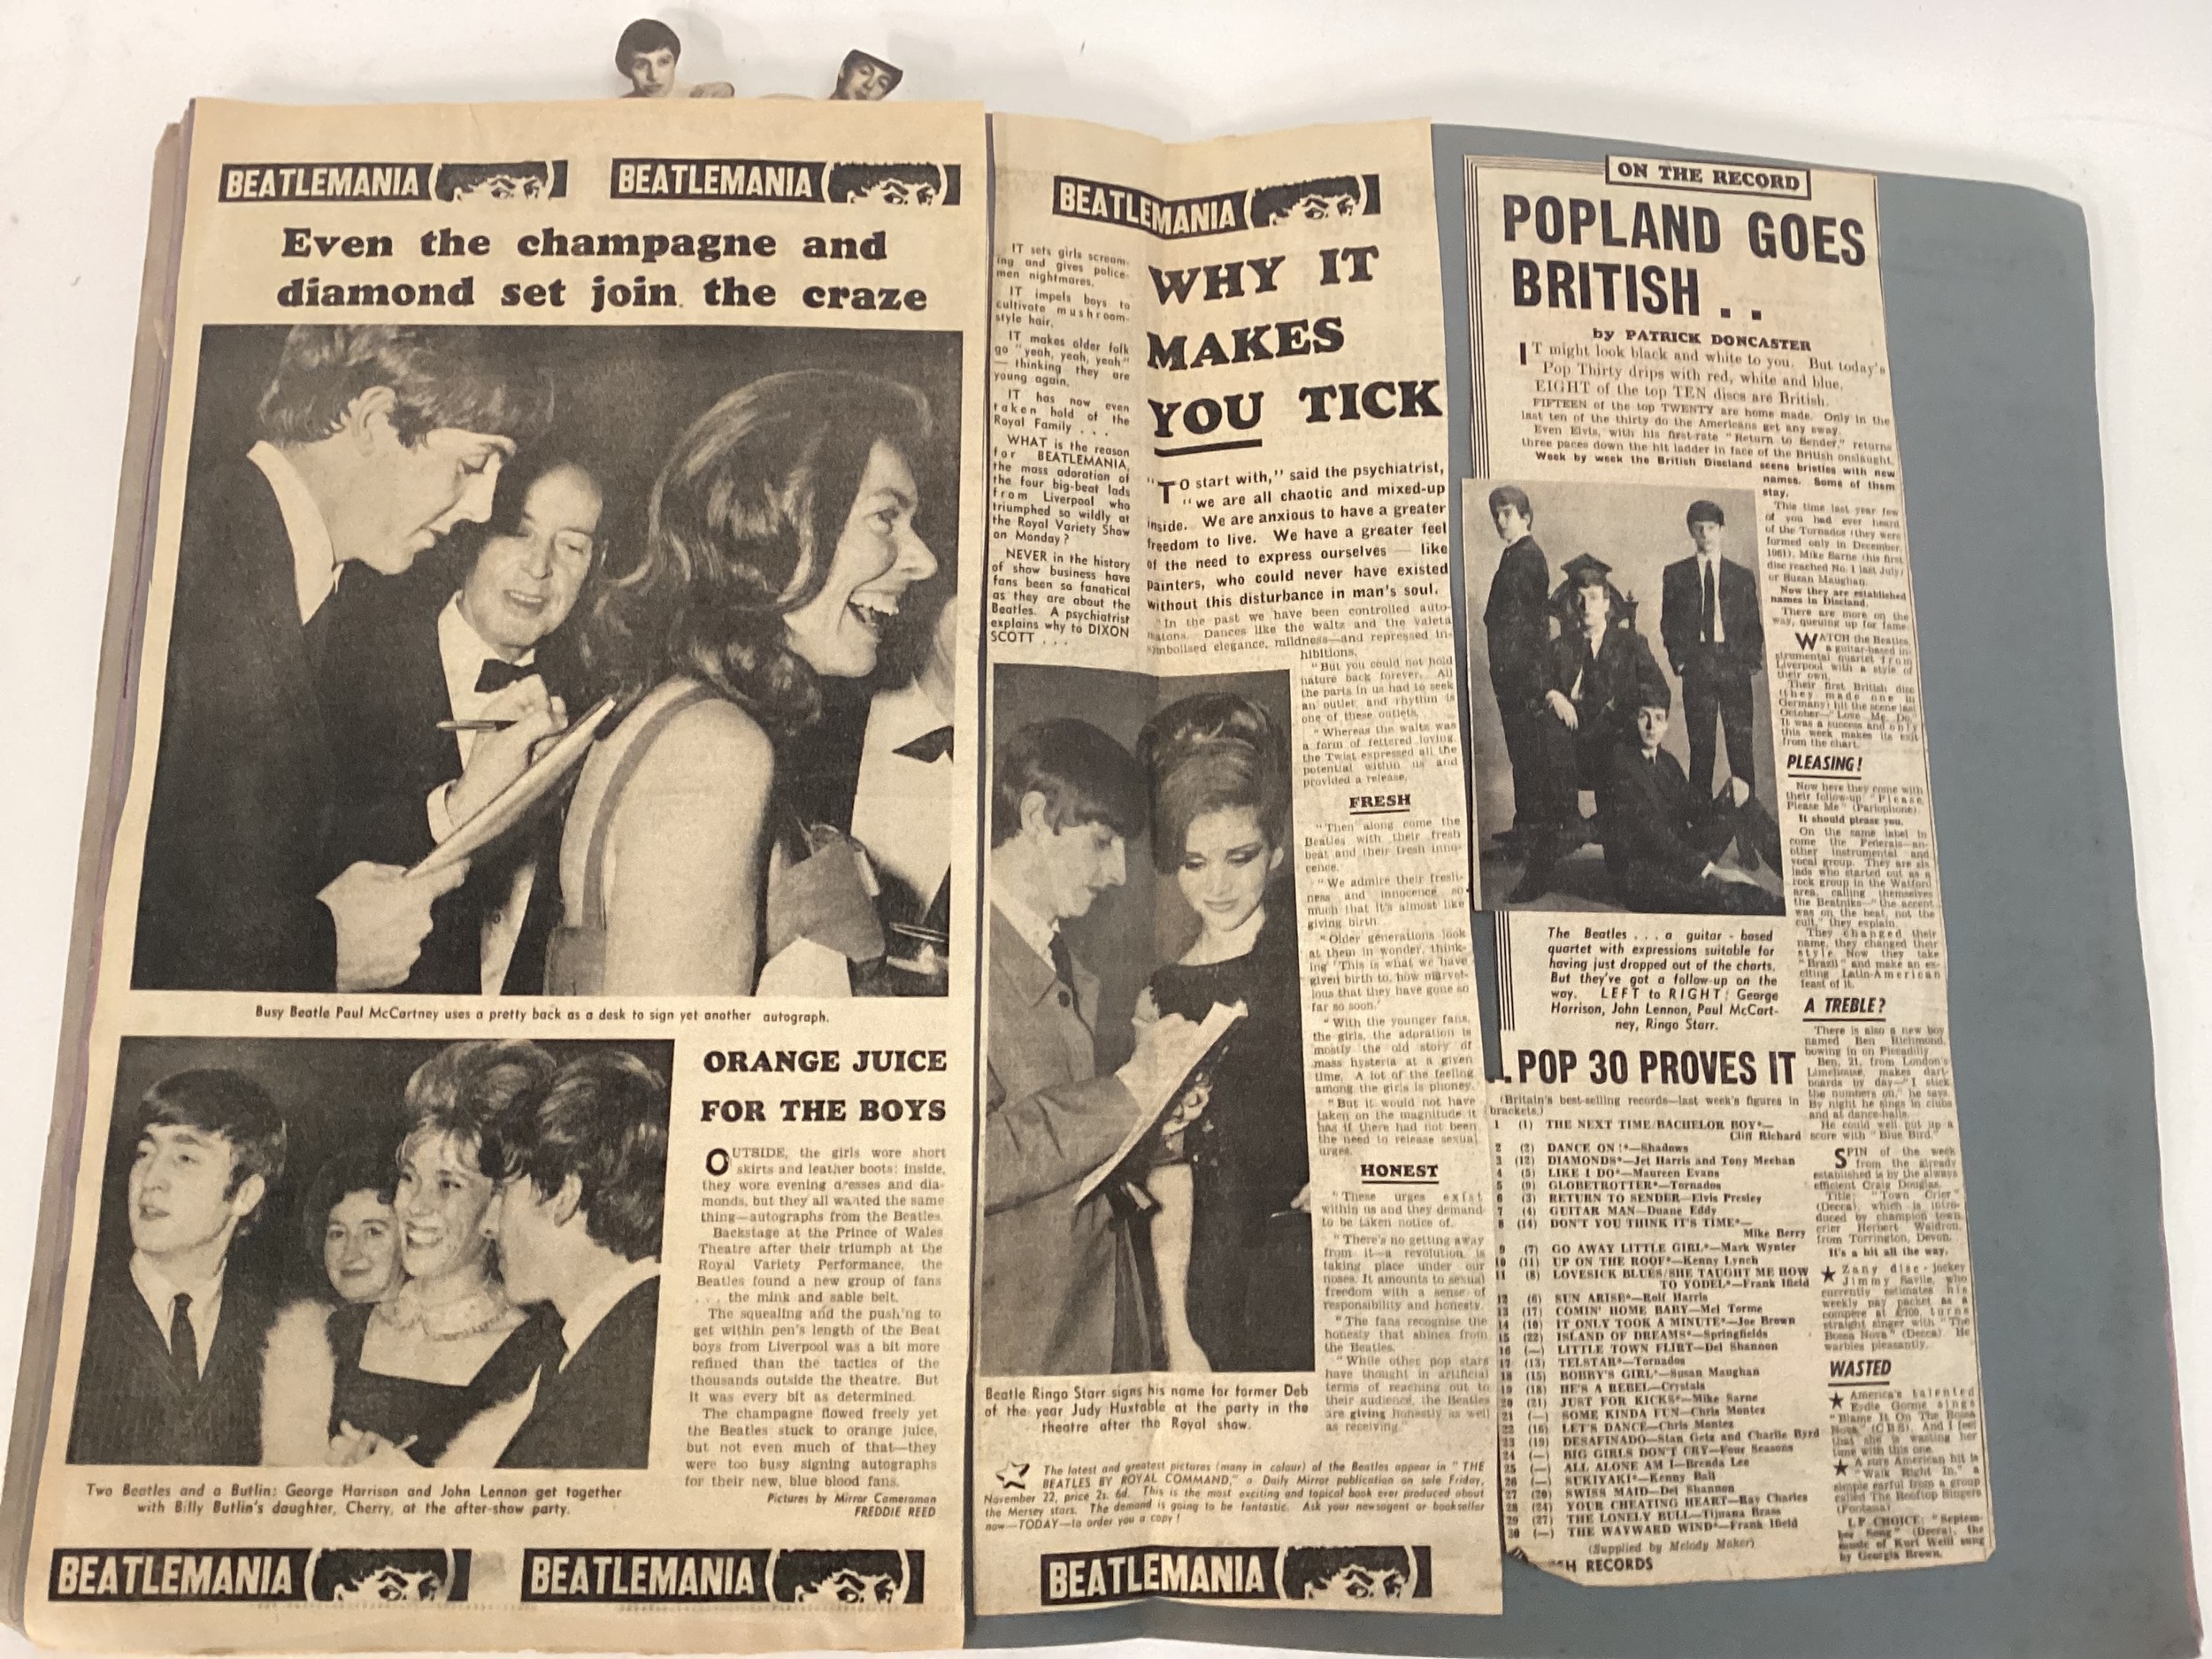 COLLECTION OF EPHEMERA FROM THE BEATLES. Nice collection of various items in print from The Beatles. - Image 7 of 9